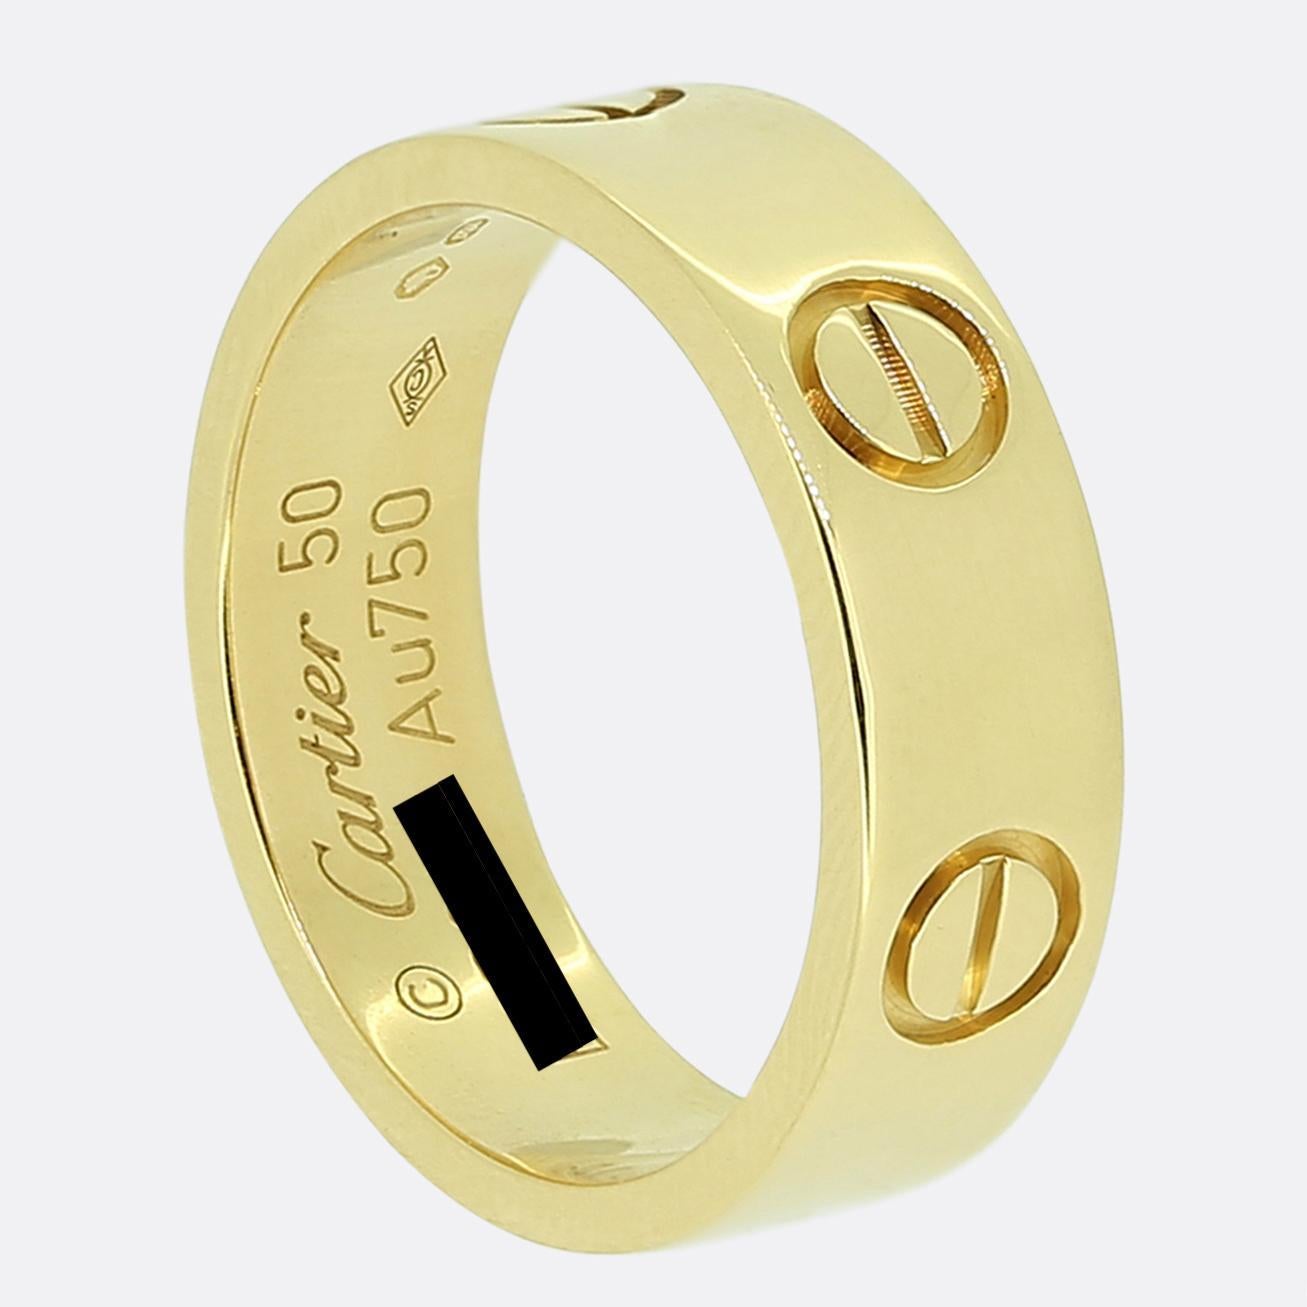 Here we have an 18ct yellow gold ring from the world renowned luxury jewellery house of Cartier. This ring forms part of the iconic LOVE collection and is one of the most celebrated items of jewellery in the world. This is the wider model with a